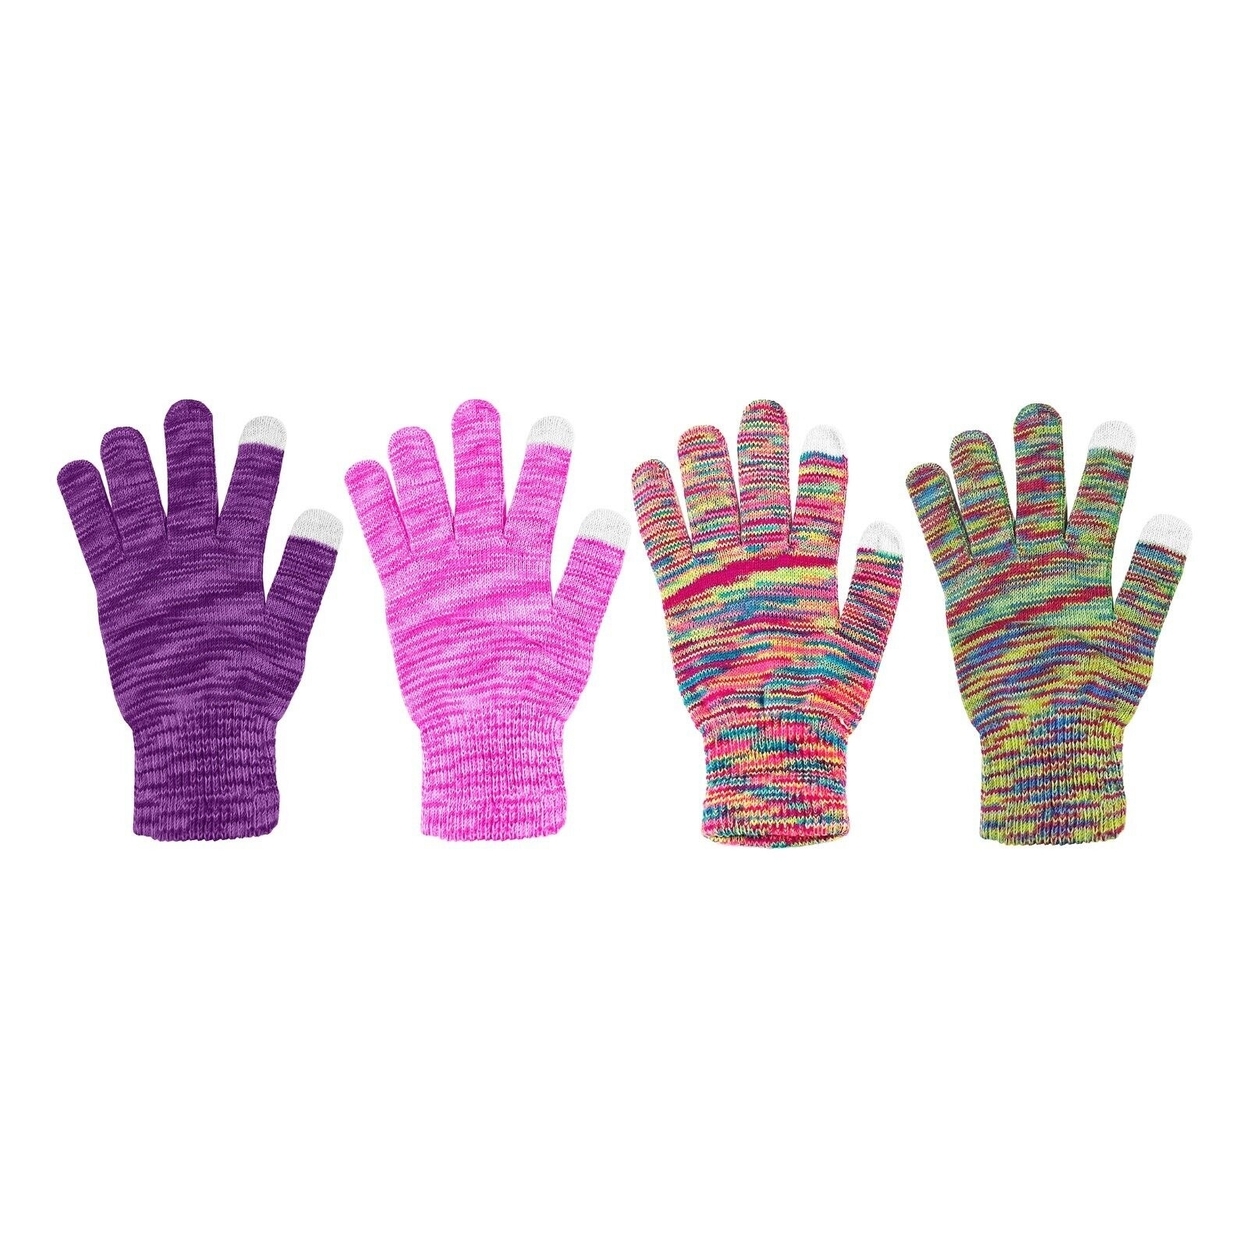 4-Pairs: Women's Winter Warm Soft Knit Touchscreen Multi-Tone Texting Gloves